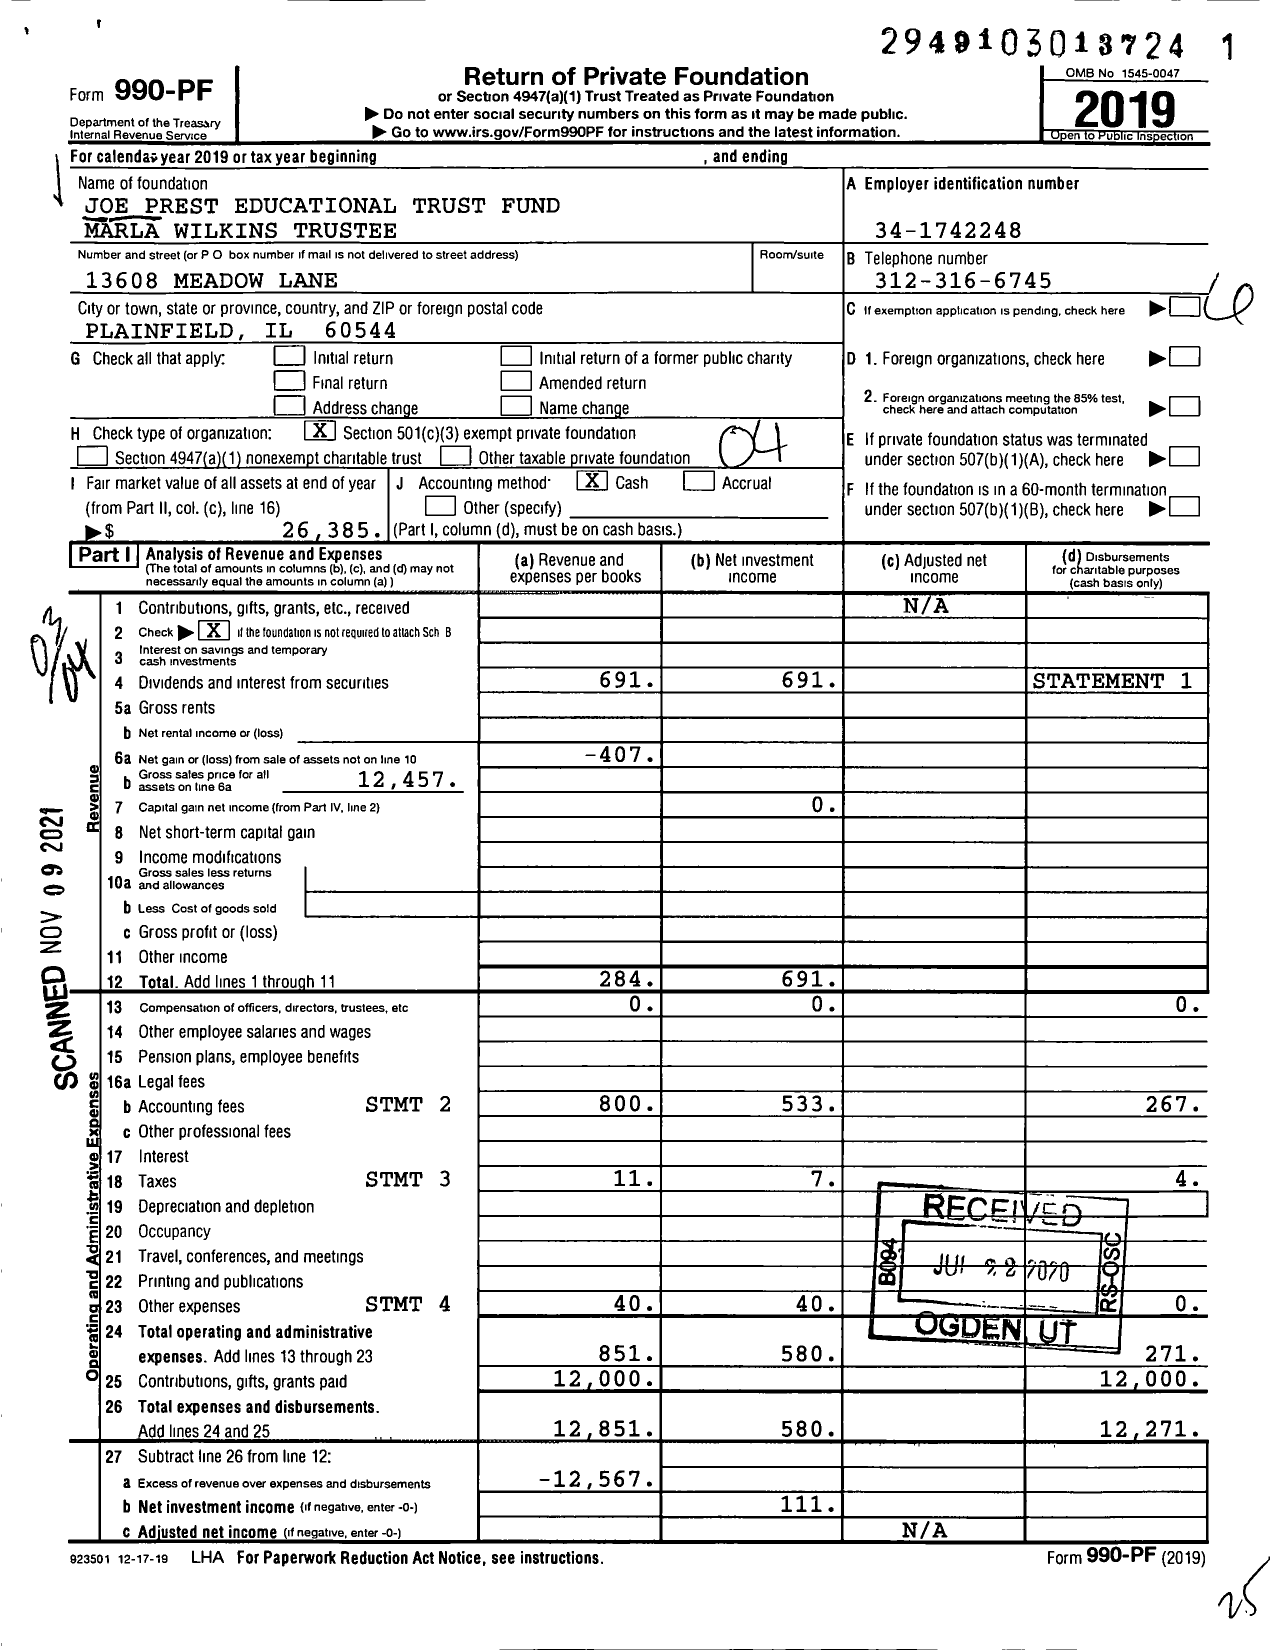 Image of first page of 2019 Form 990PF for Joe Prest Educational Trust Fund Marla Wilkins Trustee